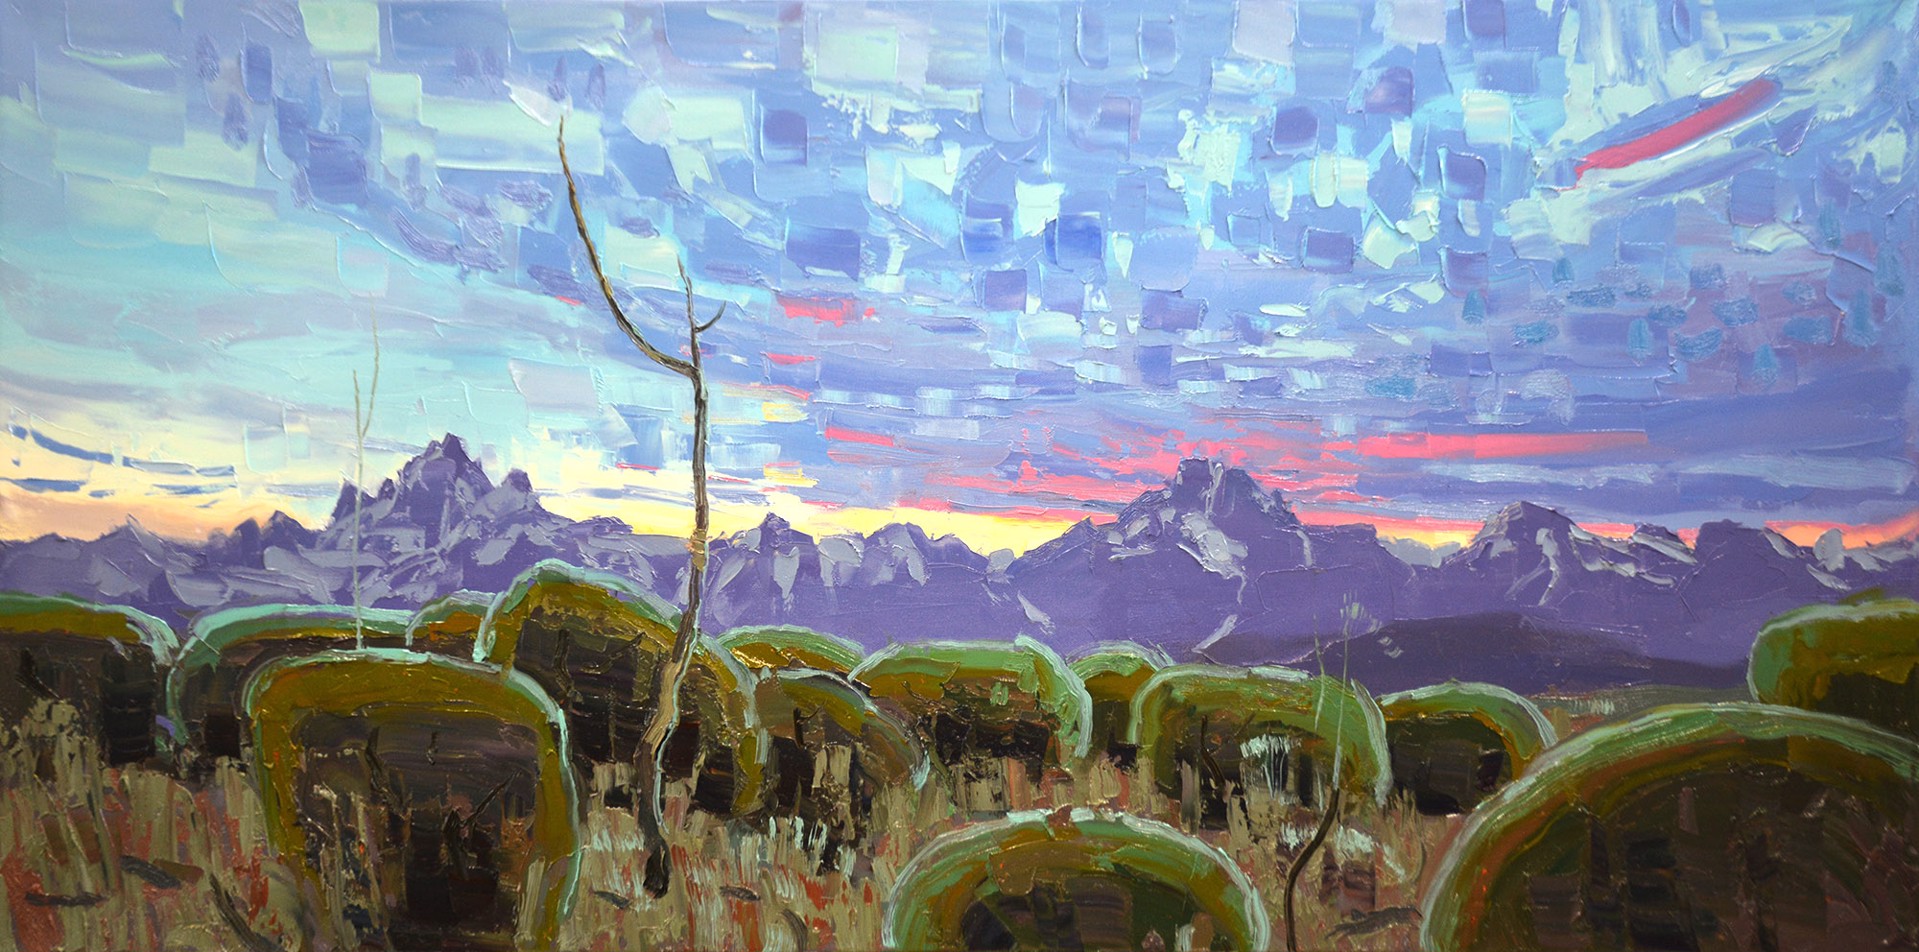 Original Contemporary Oil Painting Of A Grand Teton Landscape By Silas Thompson Available At Gallery Wild